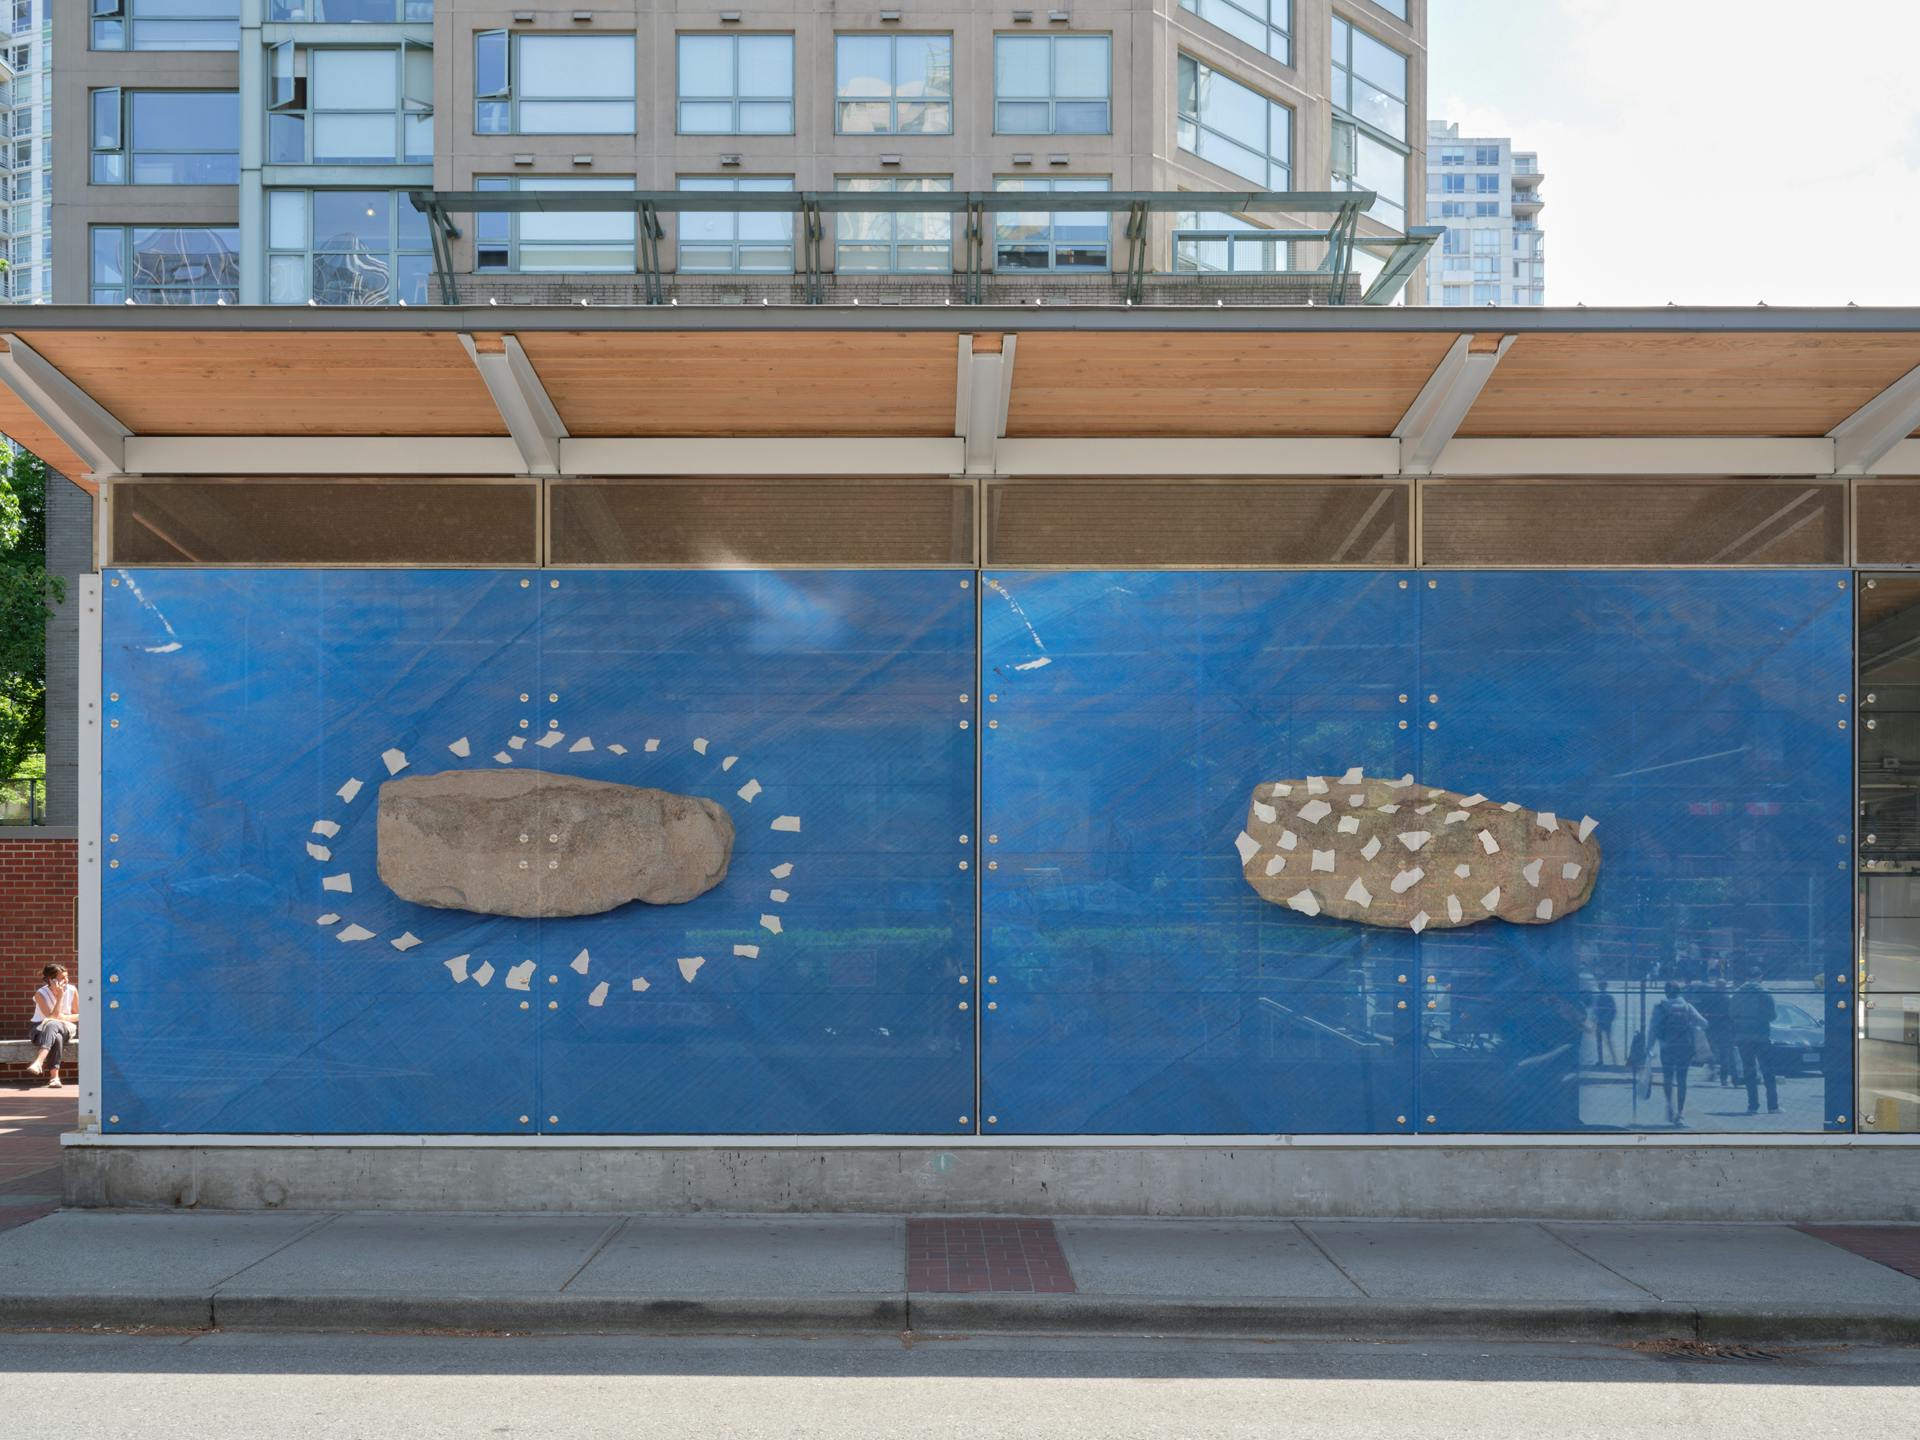 A frontal view of a SkyTrain station with two photos in its windows. The first photo depicts a rock with bits of white tape arranged in an oval around its perimeter. The second depicts the same rock with bits of white tape dotting its surface.